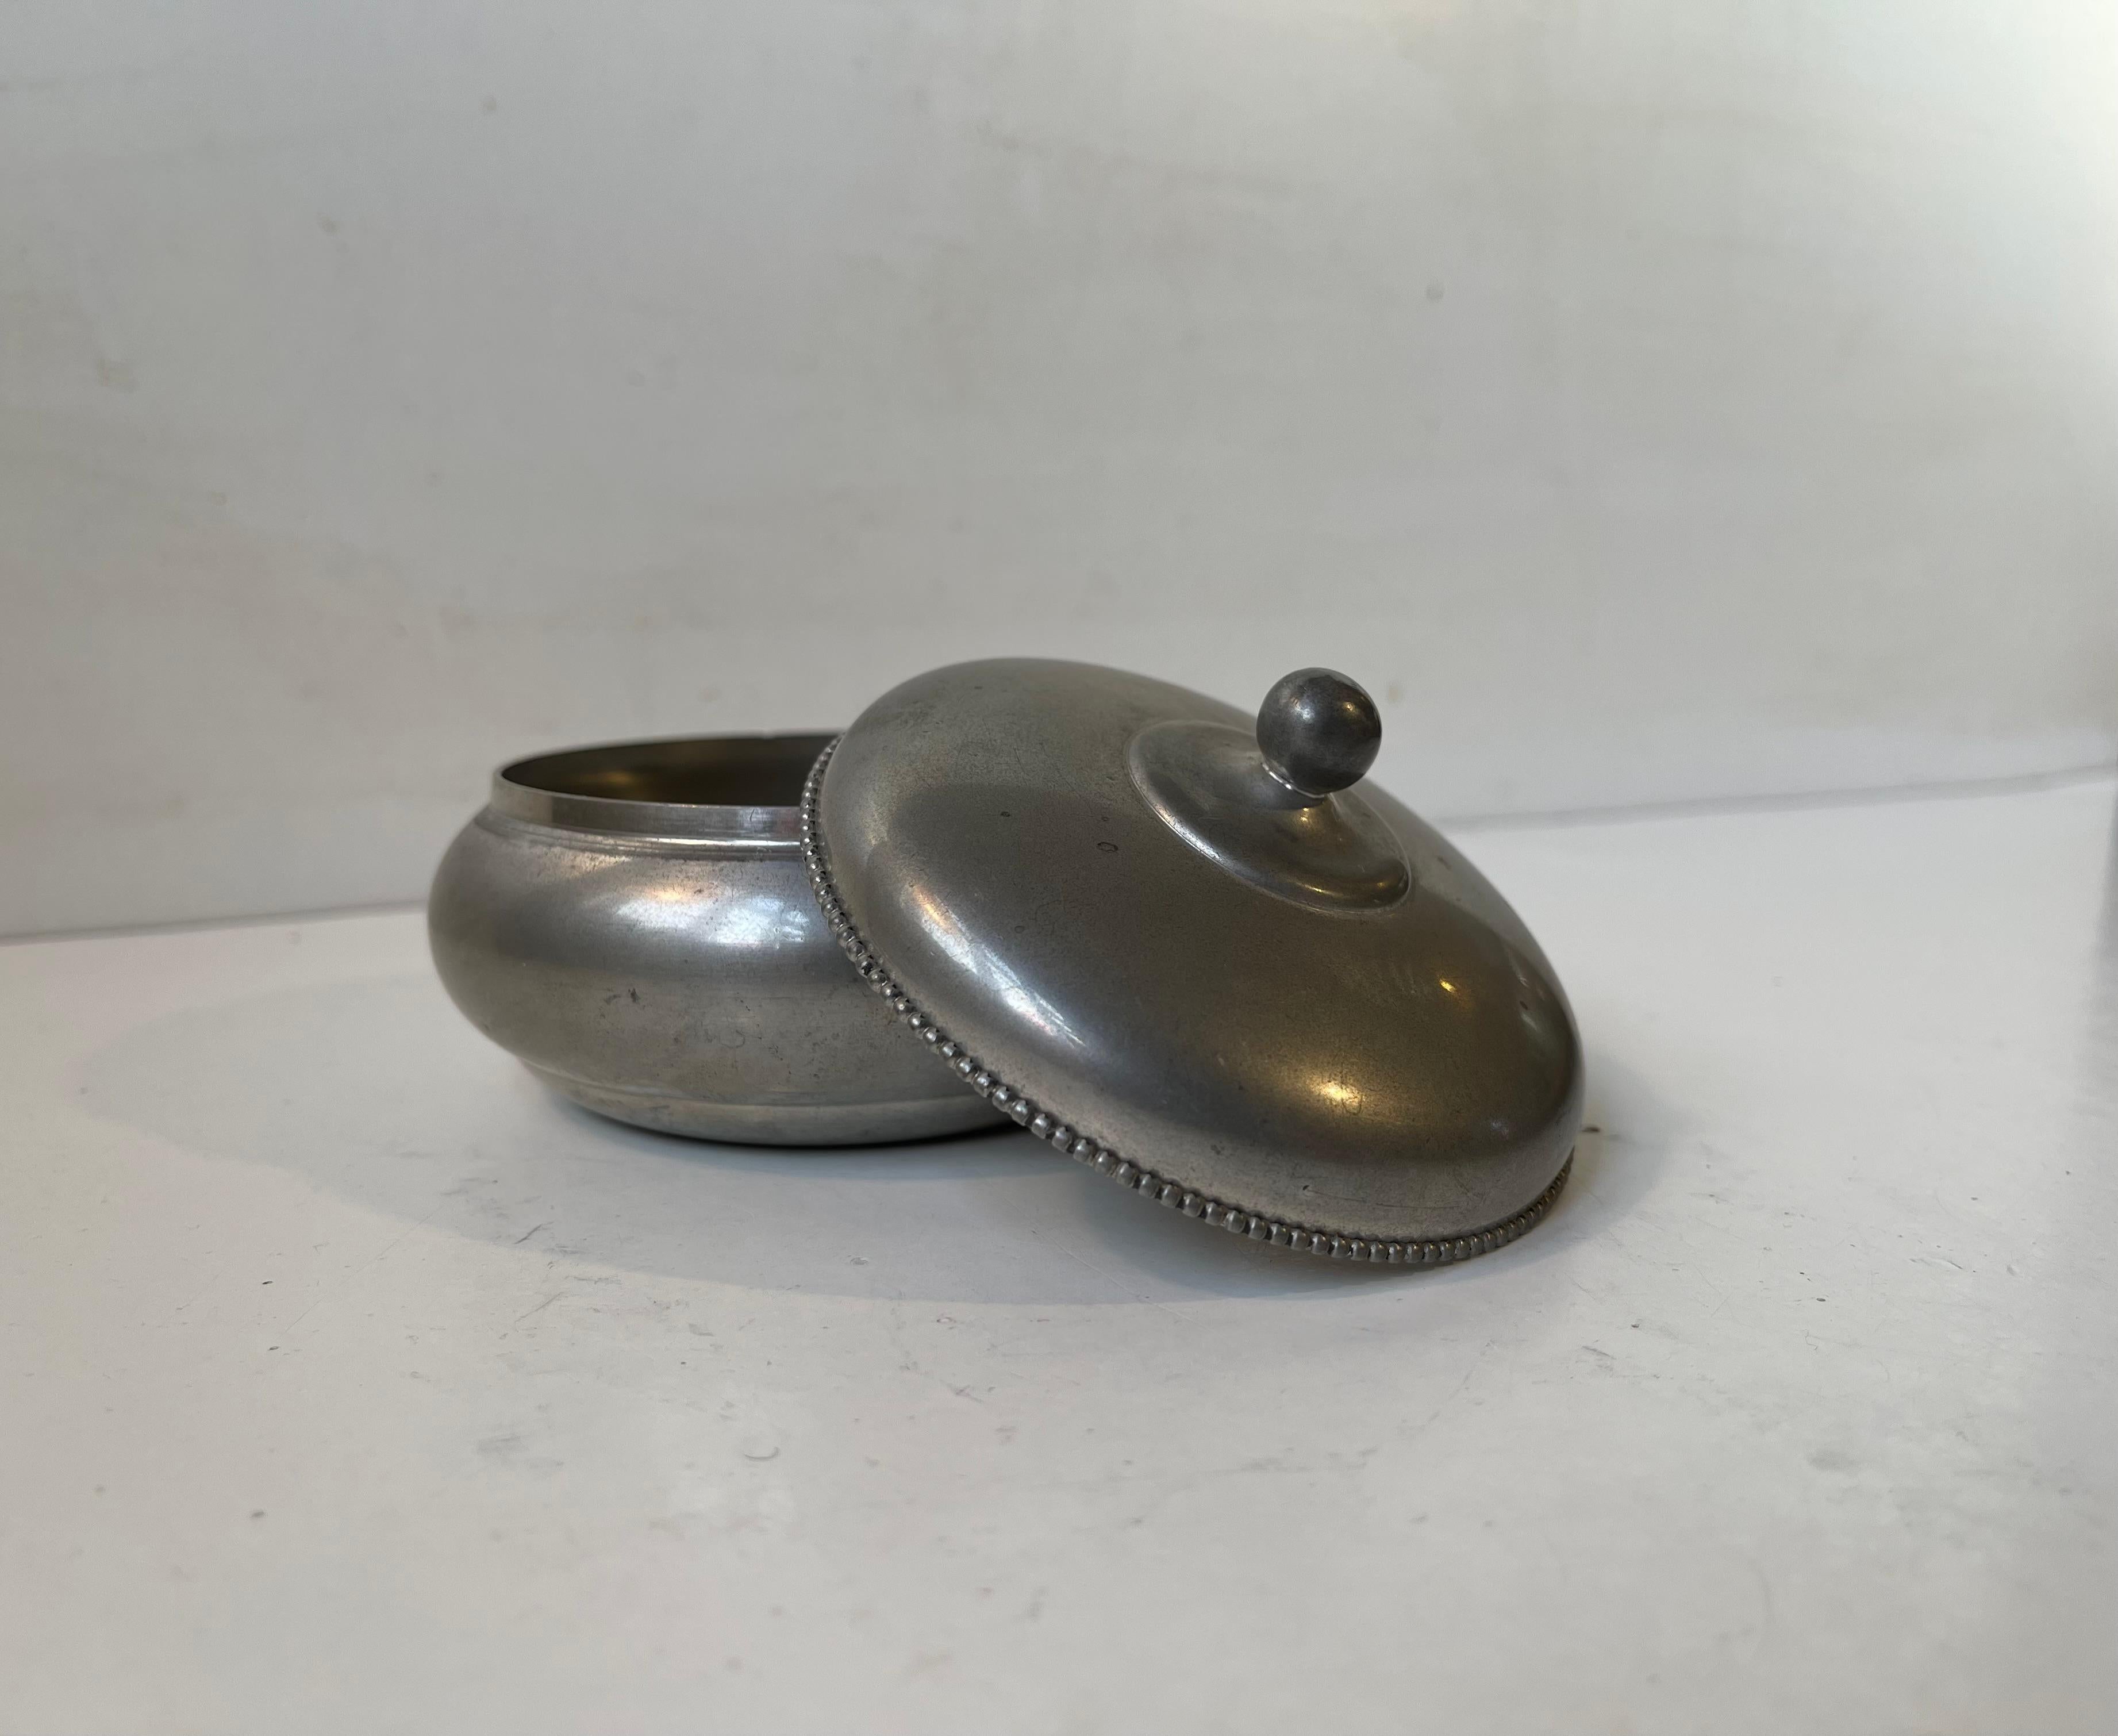 A rare pewter trinket in pewter. Clean strict design with beaded edge. Designed and manufactured by Just Andersen in Denmark during the 1930s. Imprinted to its base: Just, Danmark, 2783. Measurements: H: 7 cm, W/D: 10 cm.

Free World wide express